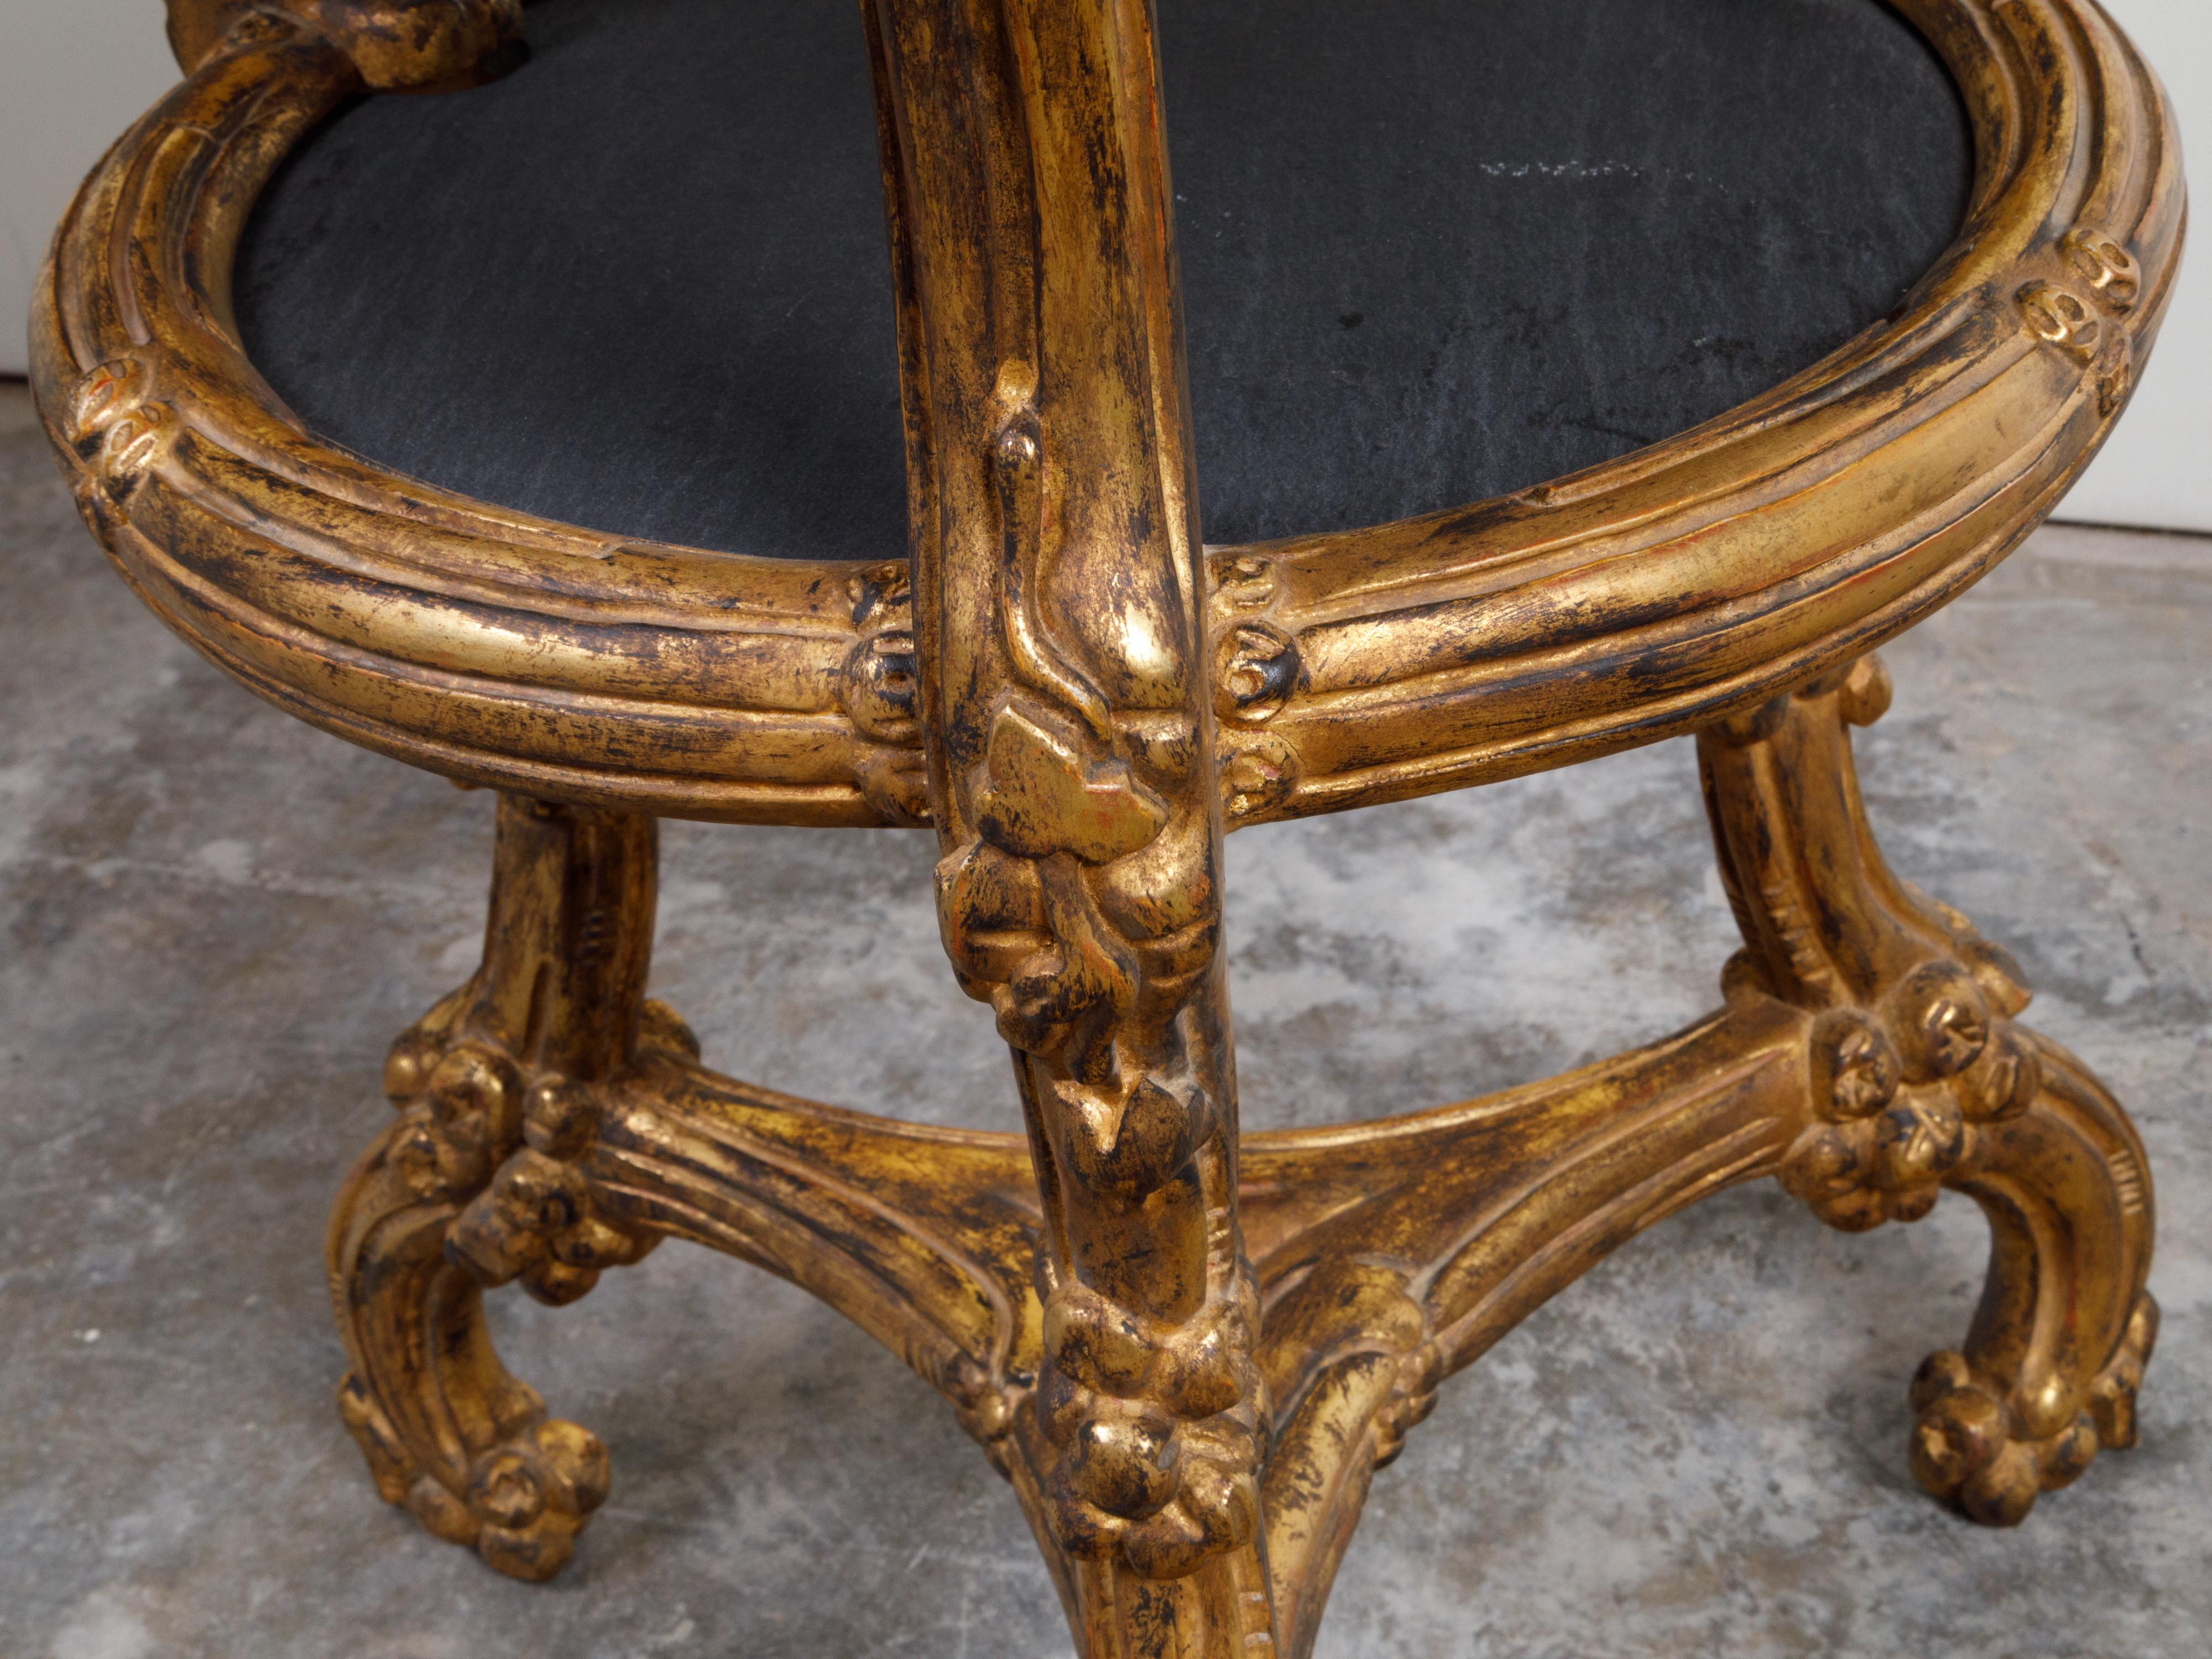 20th Century Italian Carved Giltwood Side Table with Slate Top, Shelf and Floral Motifs For Sale